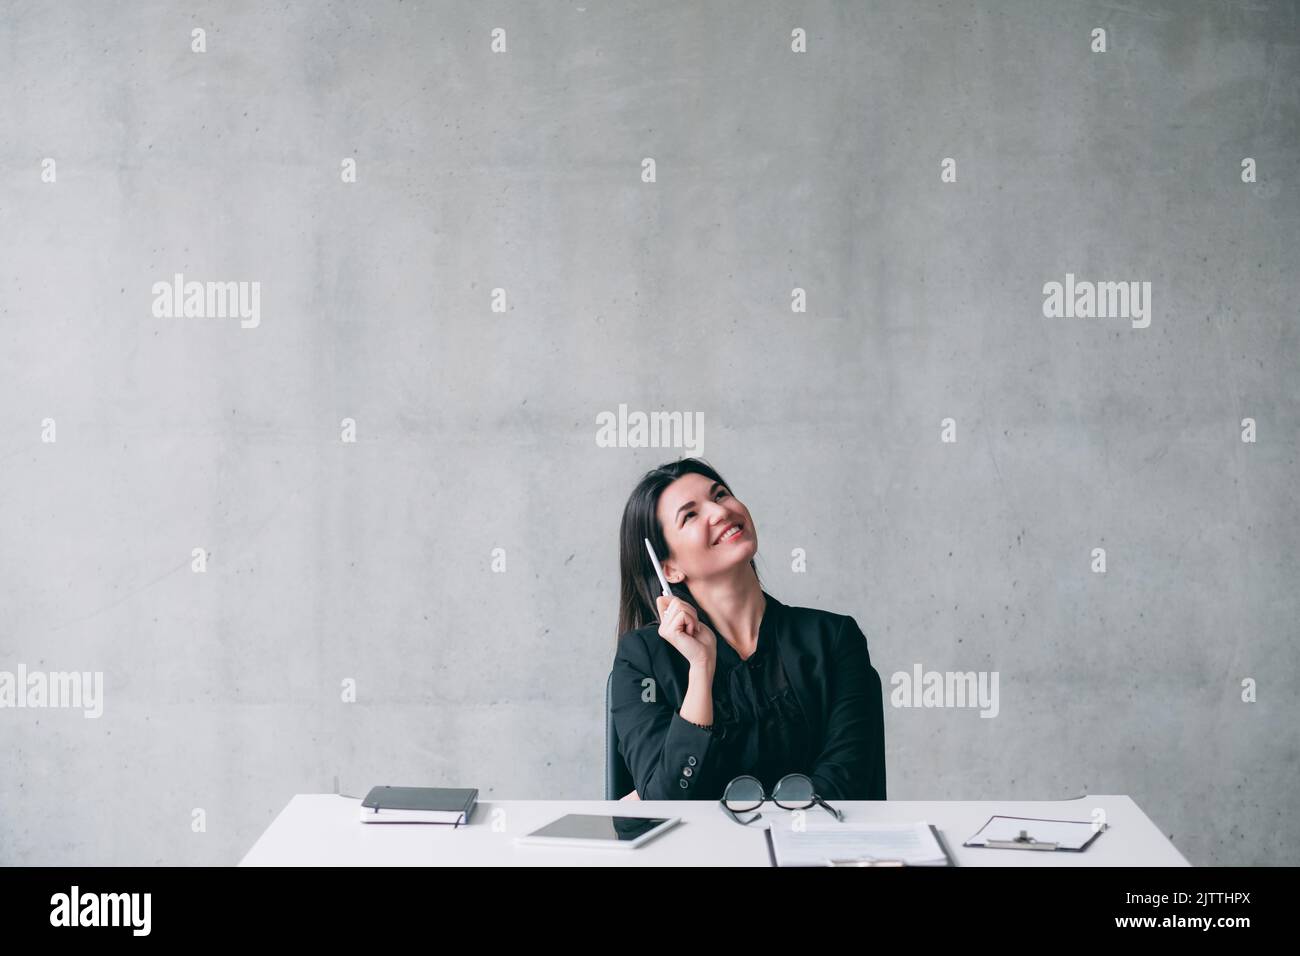 ambitious inspired business woman thinking project Stock Photo